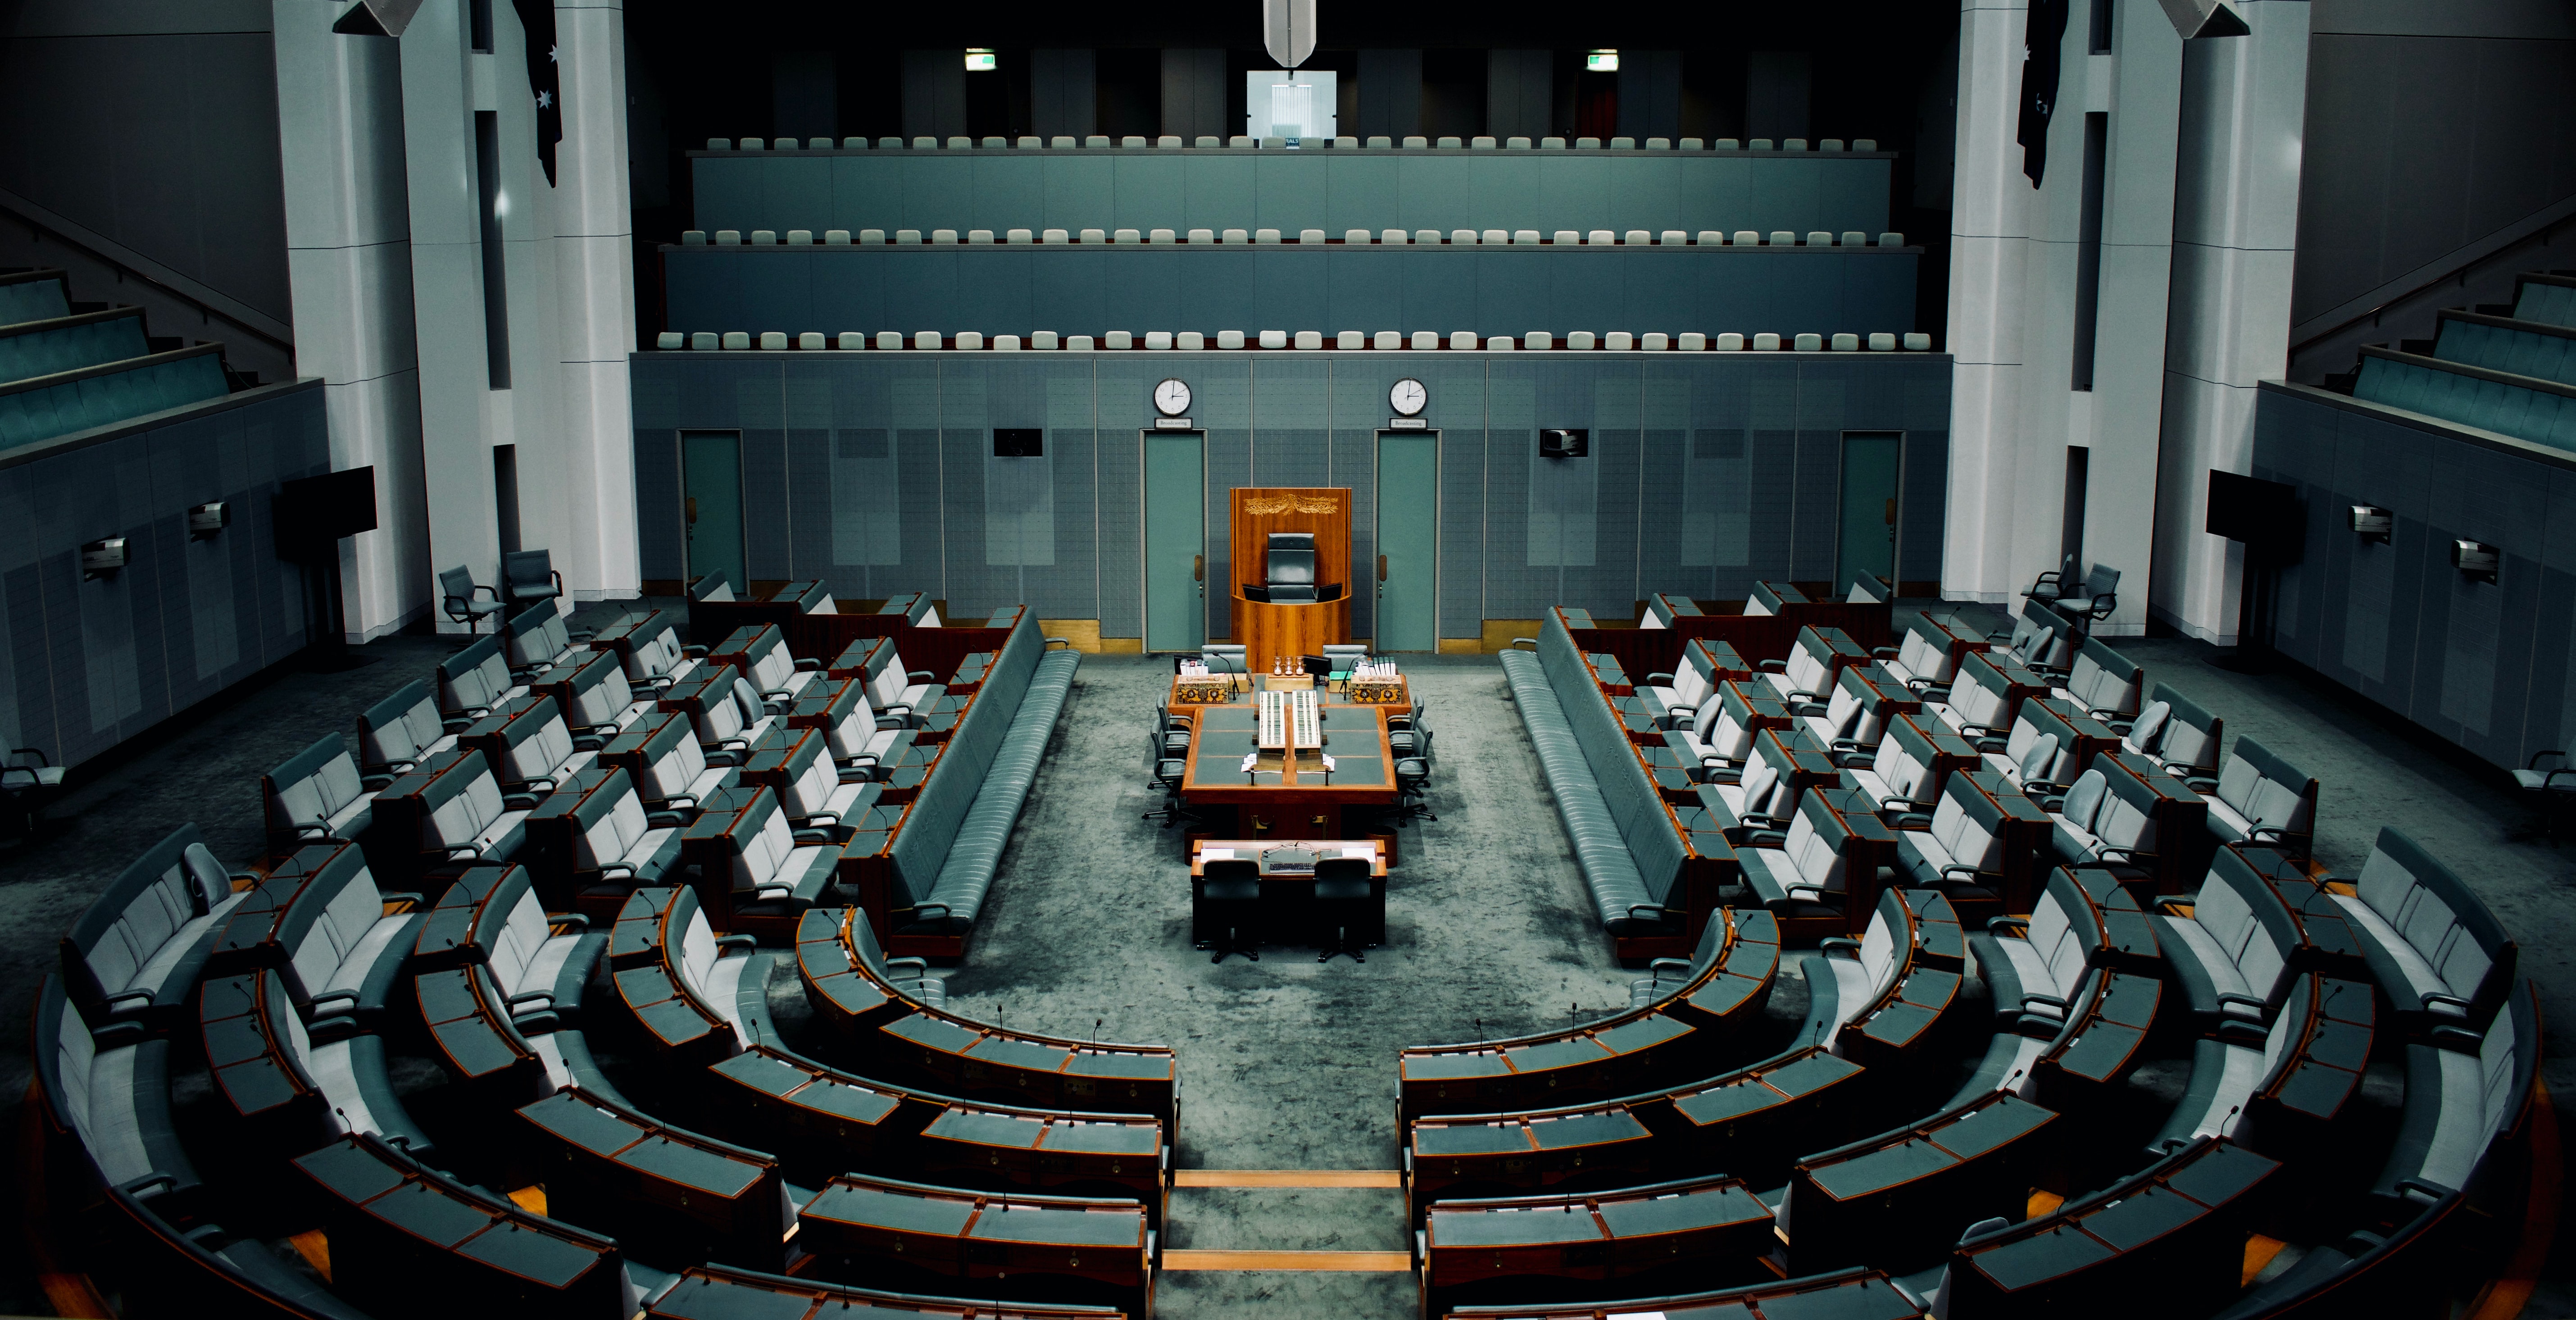 Photo showing the public gallery of a parliament.